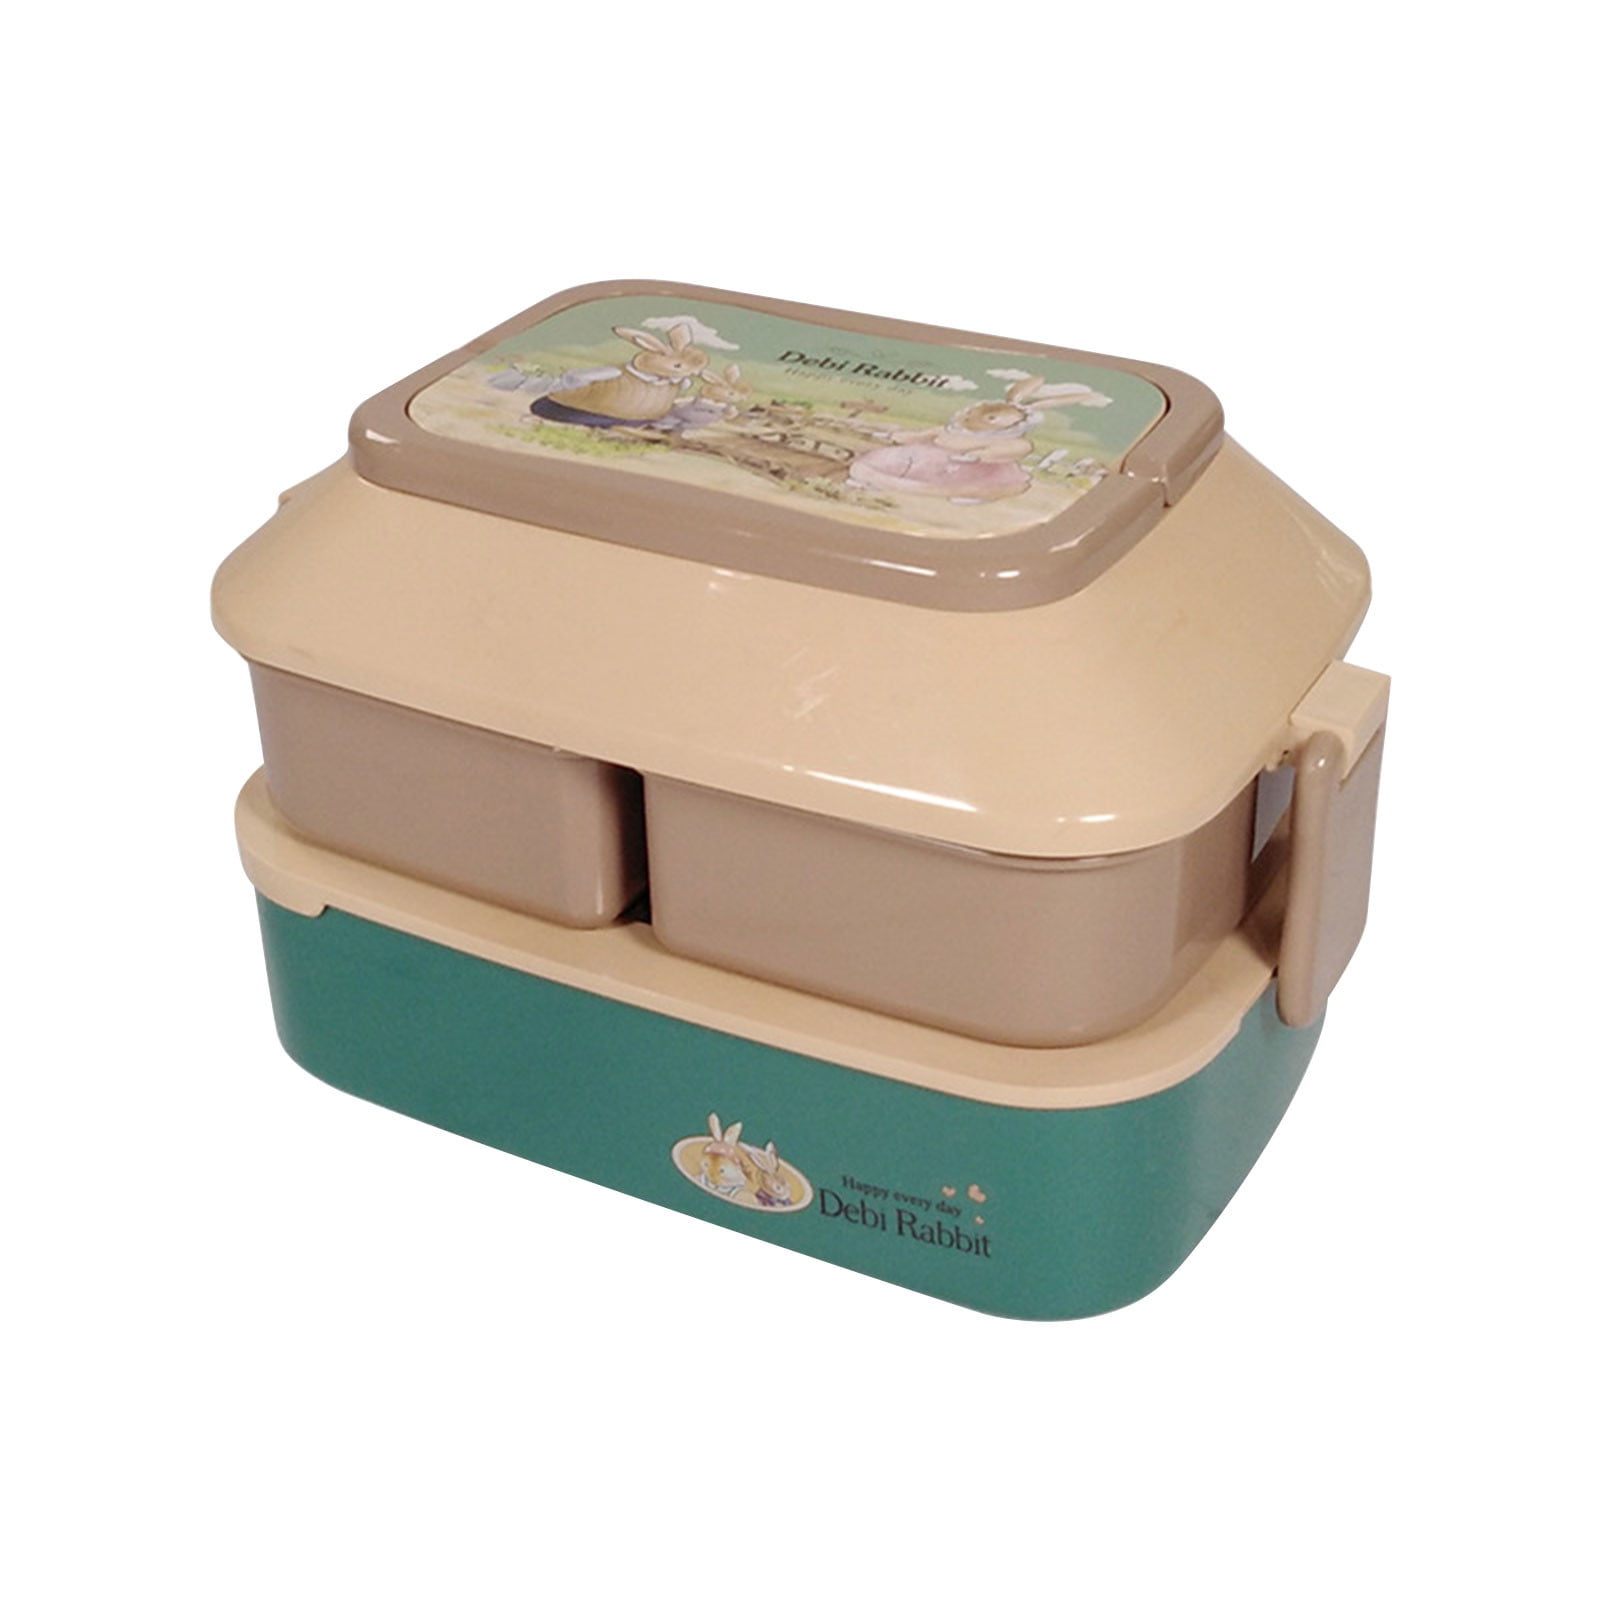 XMMSWDLA Bento Box Adult Lunch Box, Portable Insulated Lunch